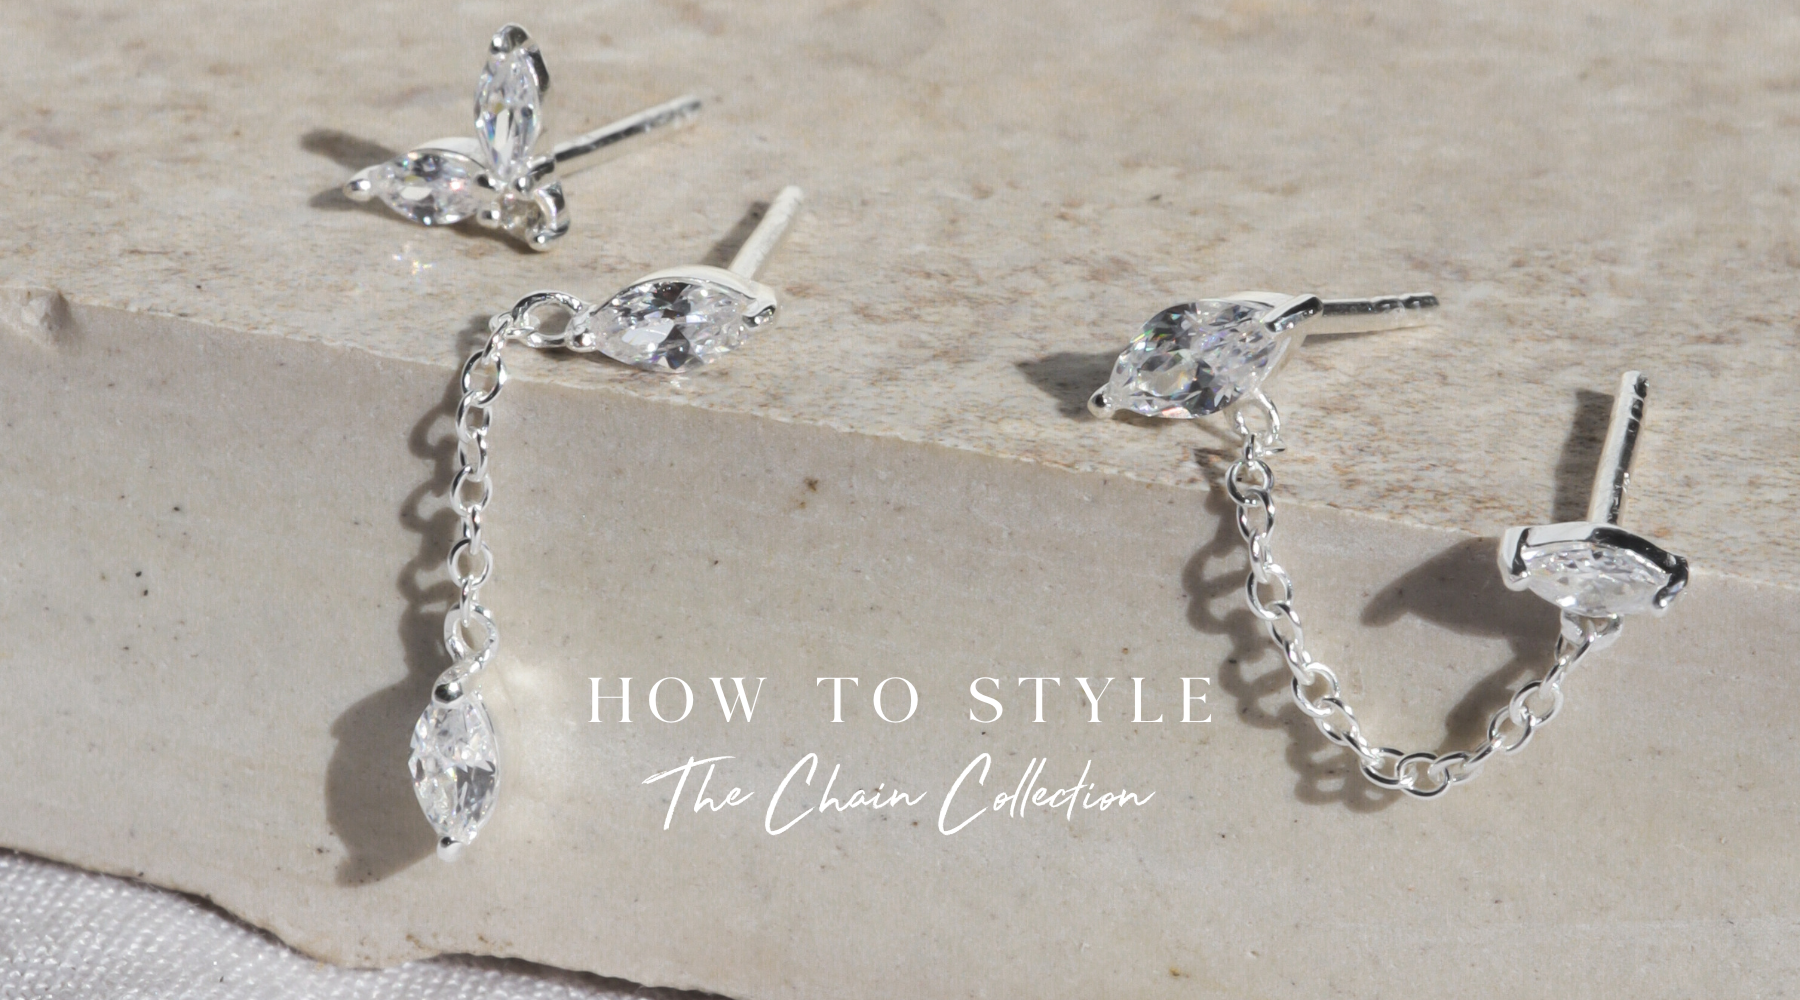 How To Style: The Chain Collection